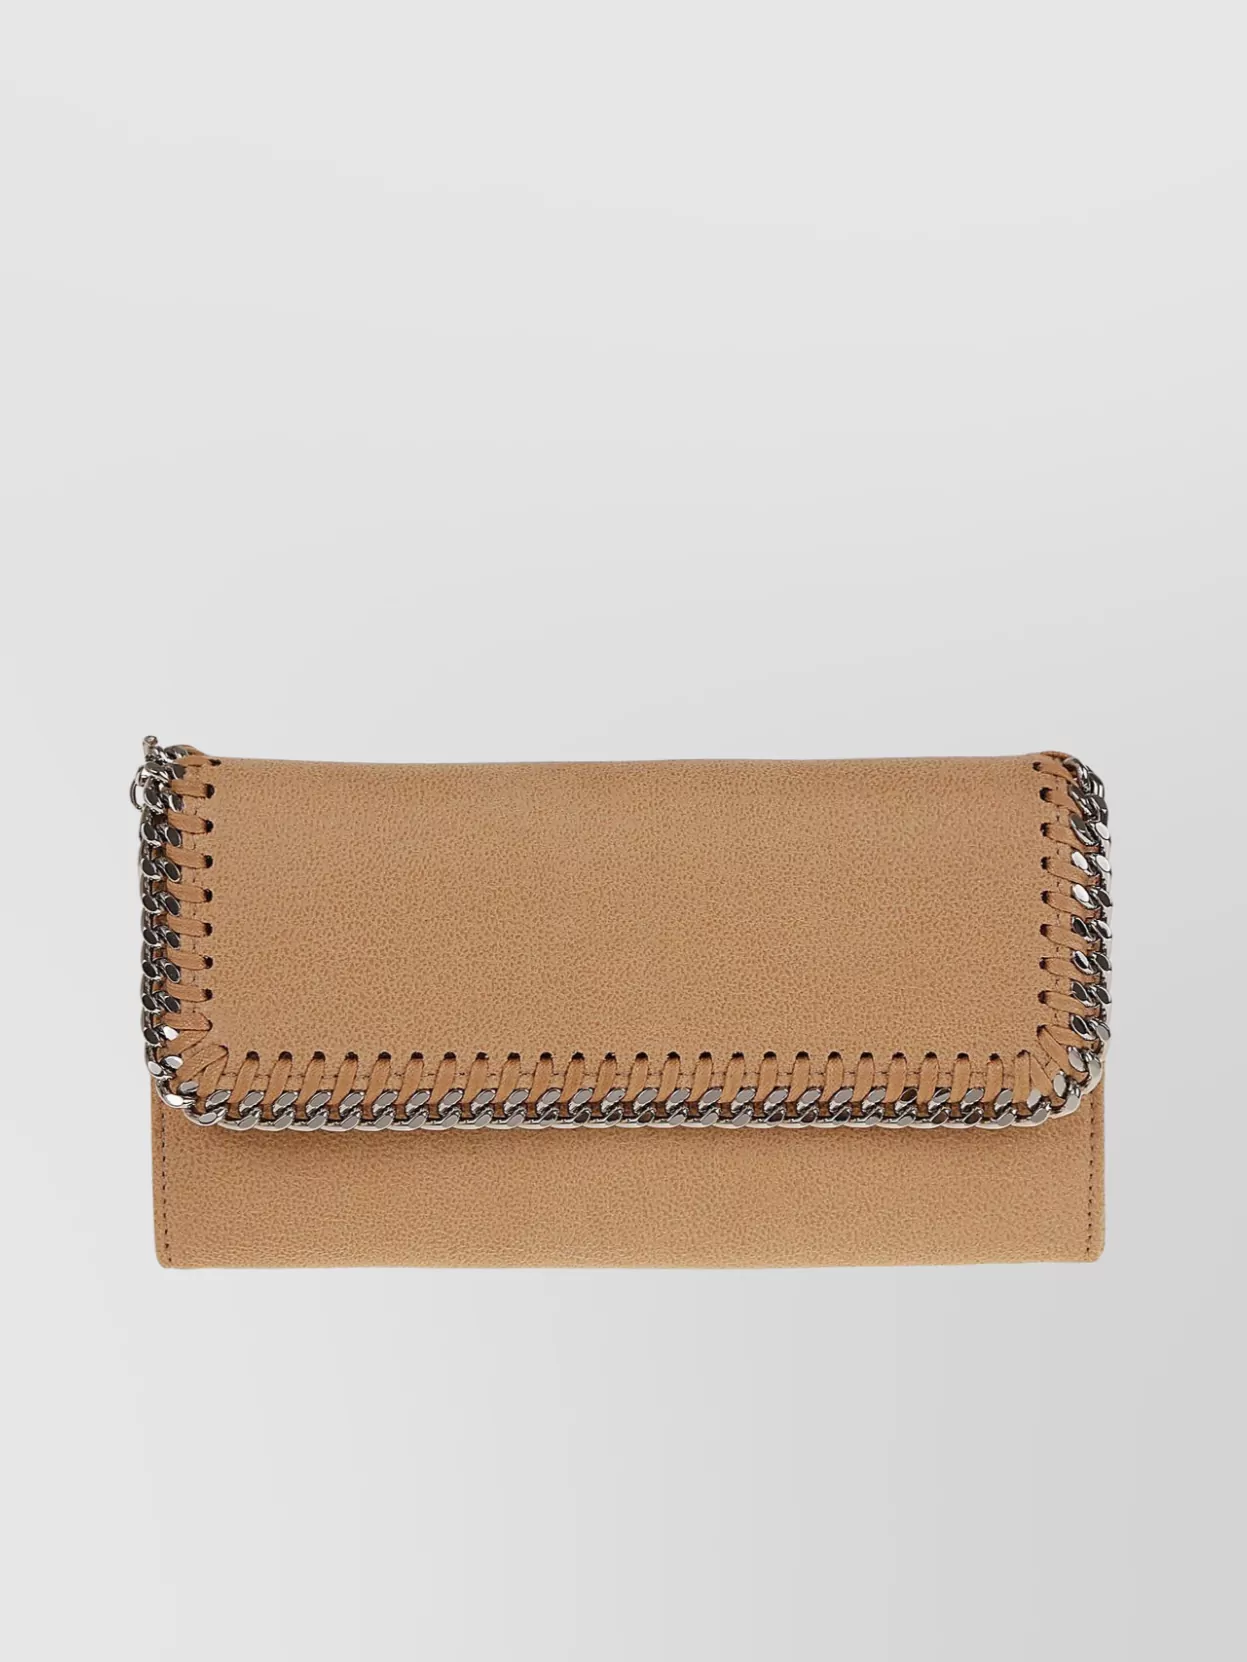 Stella Mccartney Falabella Flap Wallet With Chain Detail And Textured Finish In Beige